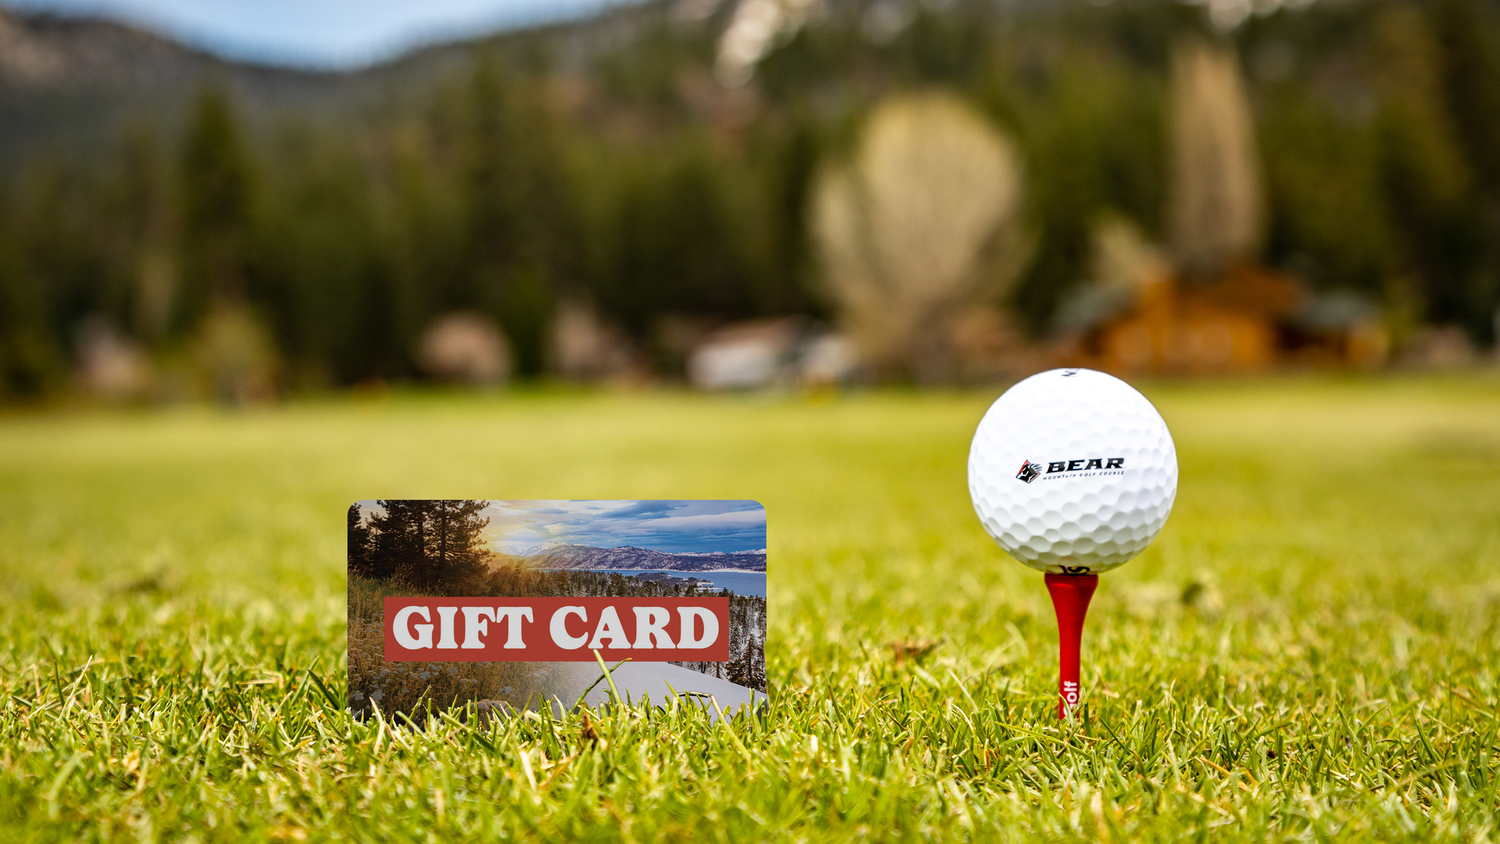 Gift Card on a golf course with a golf ball next to it